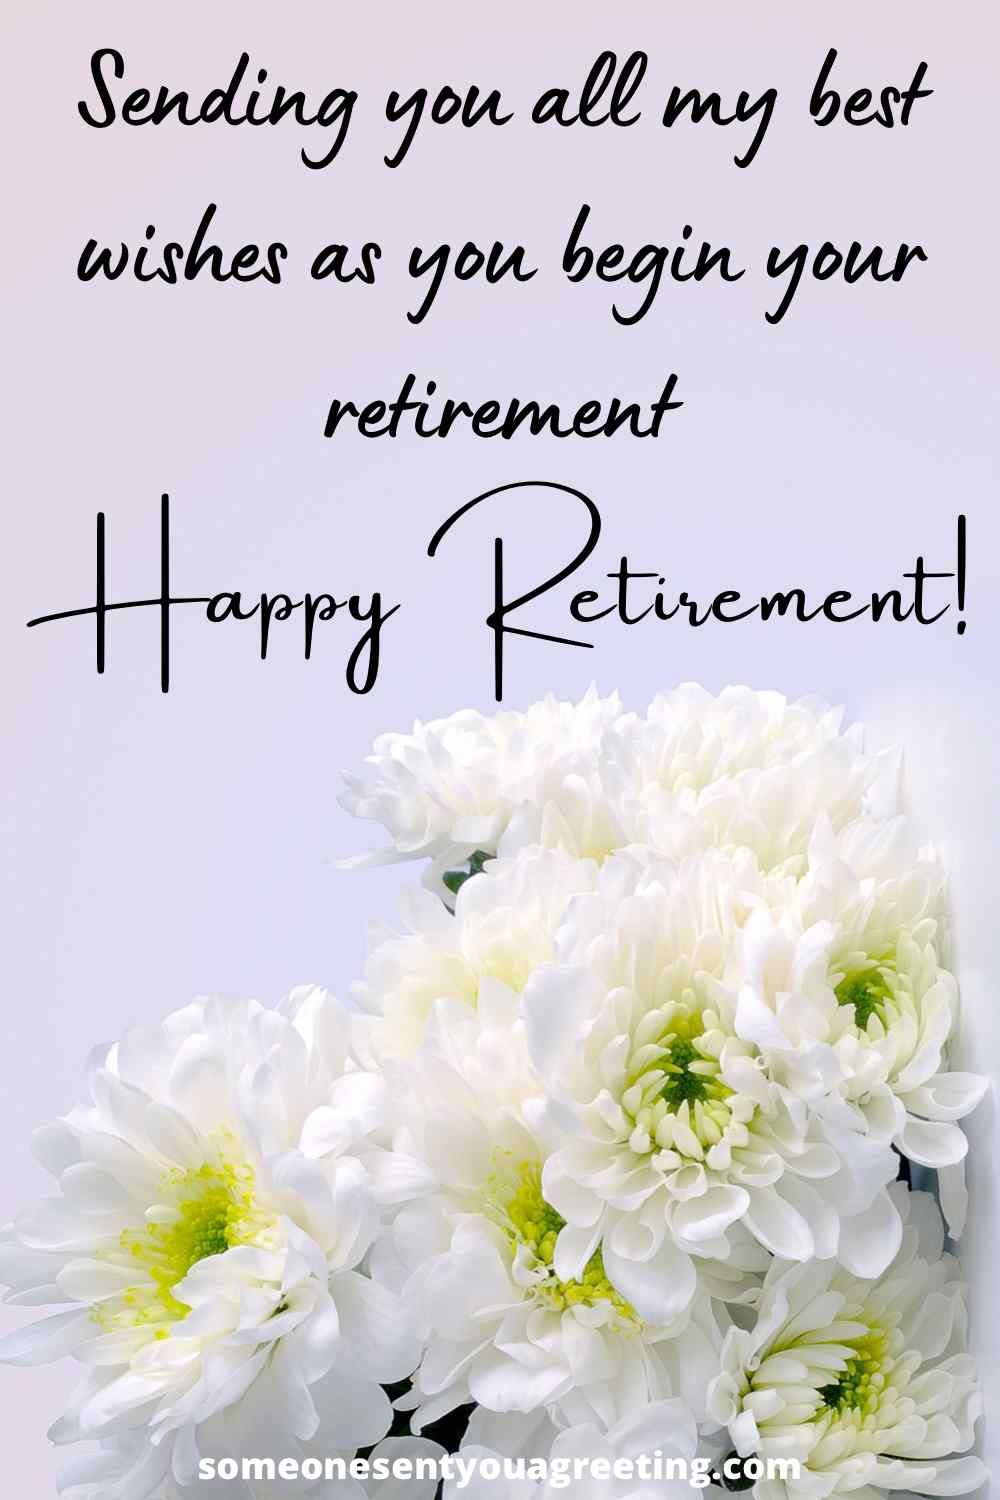 33 Retirement Messages For Uncle Someone Sent You A Greeting